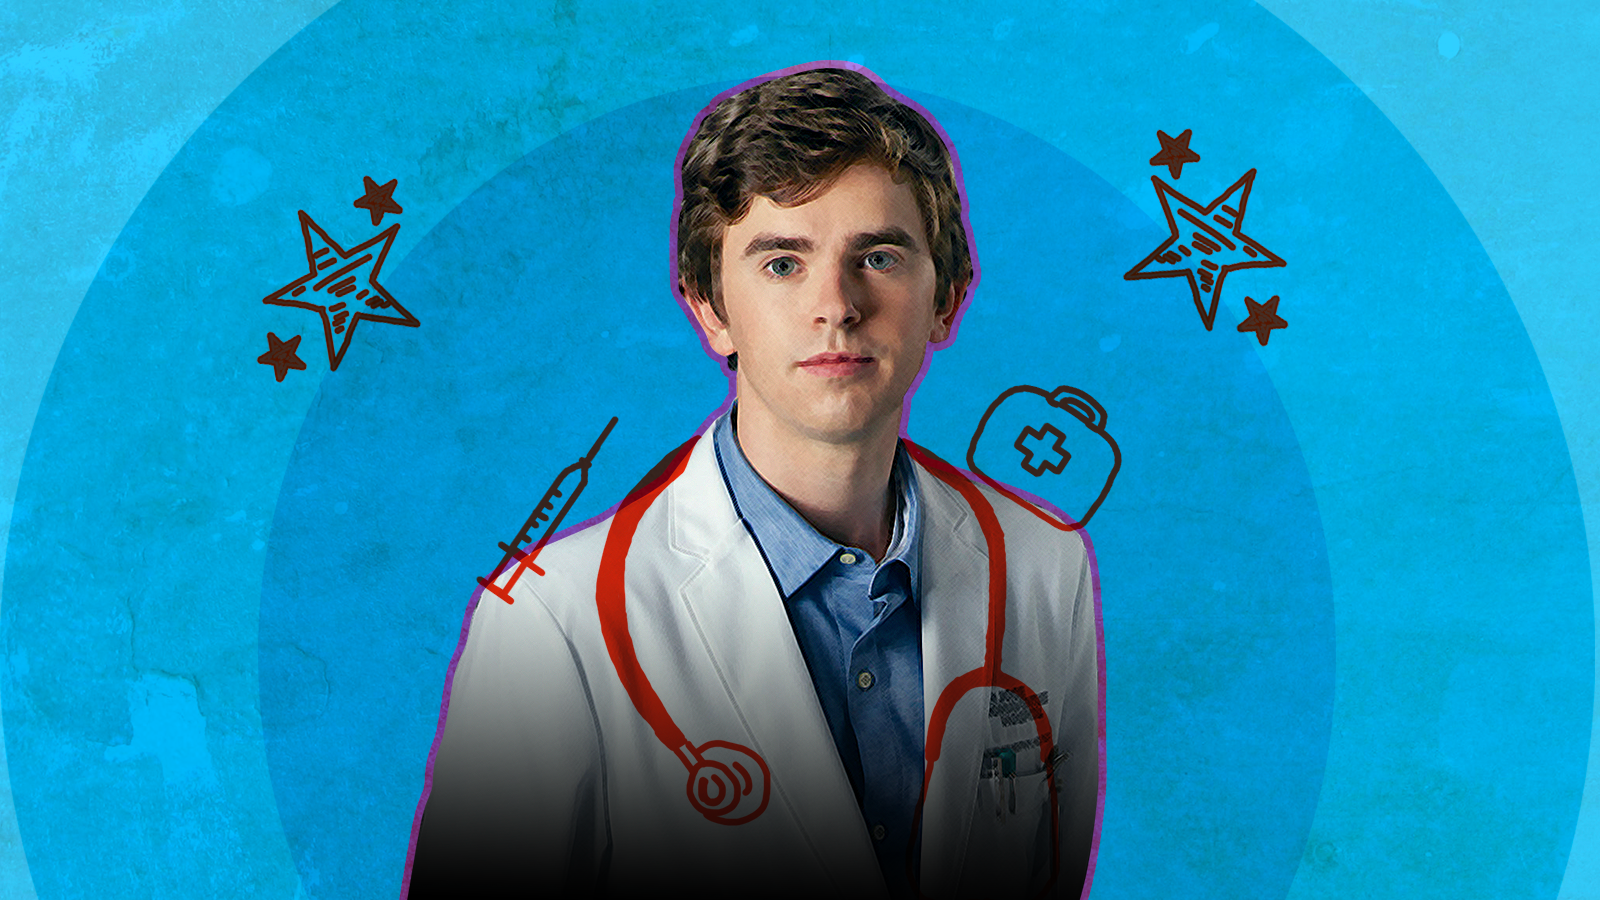 The Good Doctor Is the Most Consistent Show on TV - TV Guide